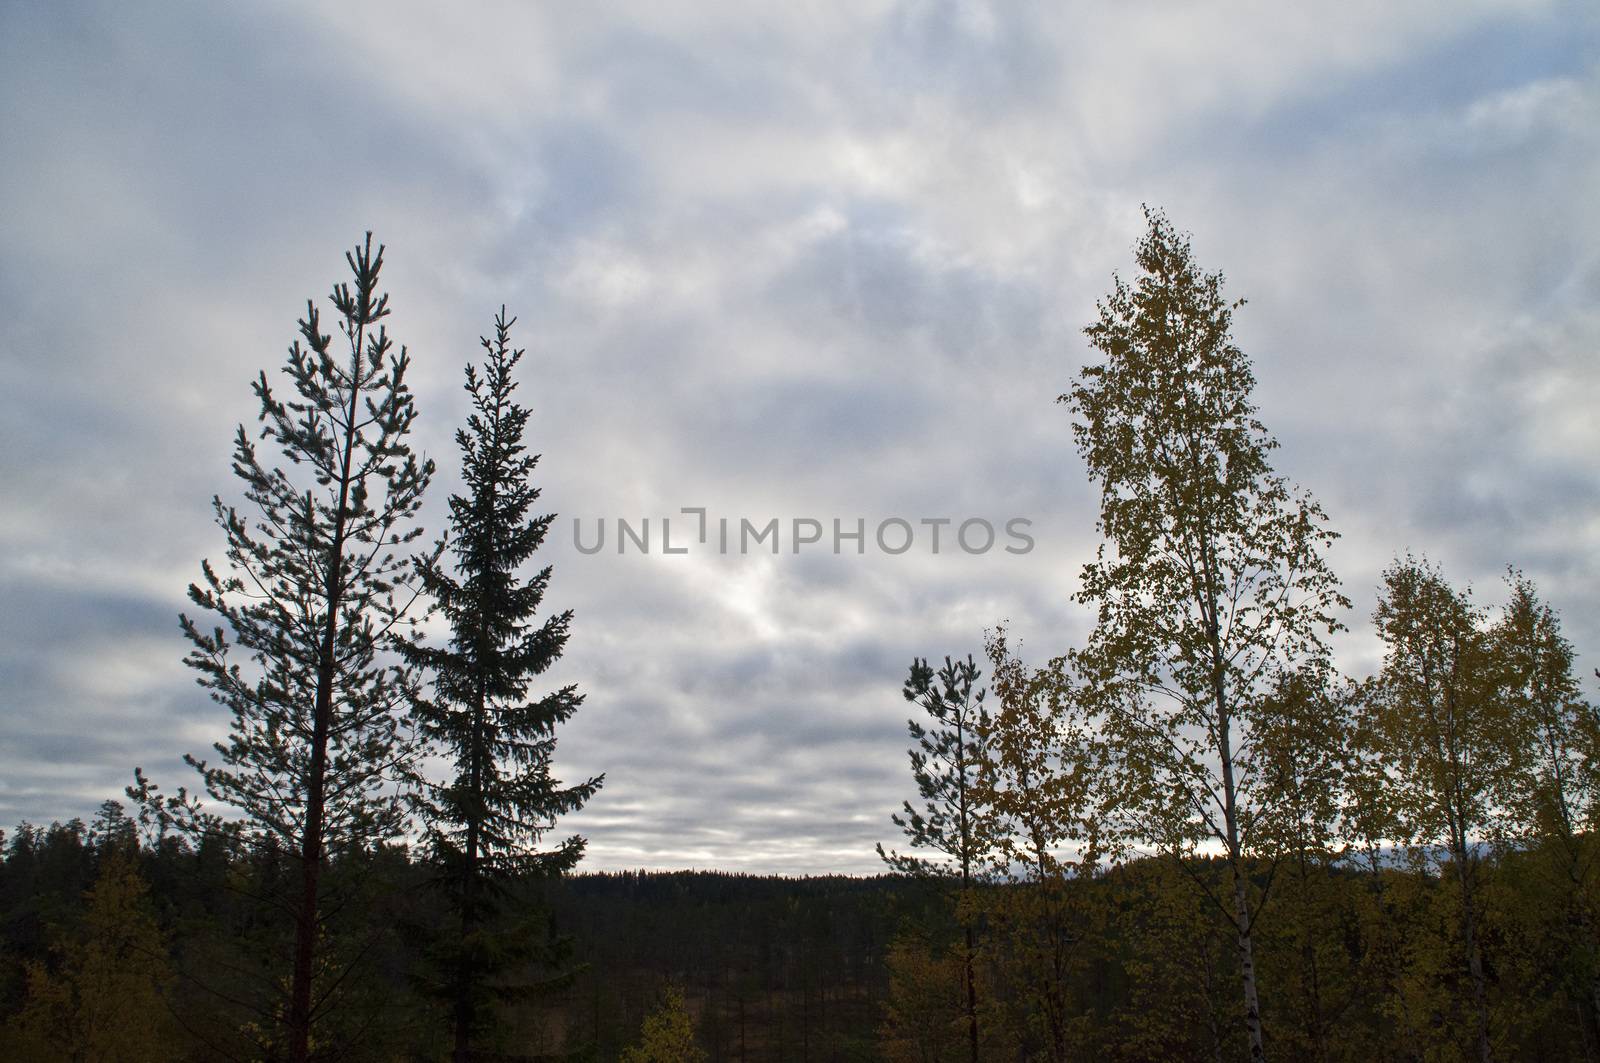 Nature in the region of Kainuu, Finland